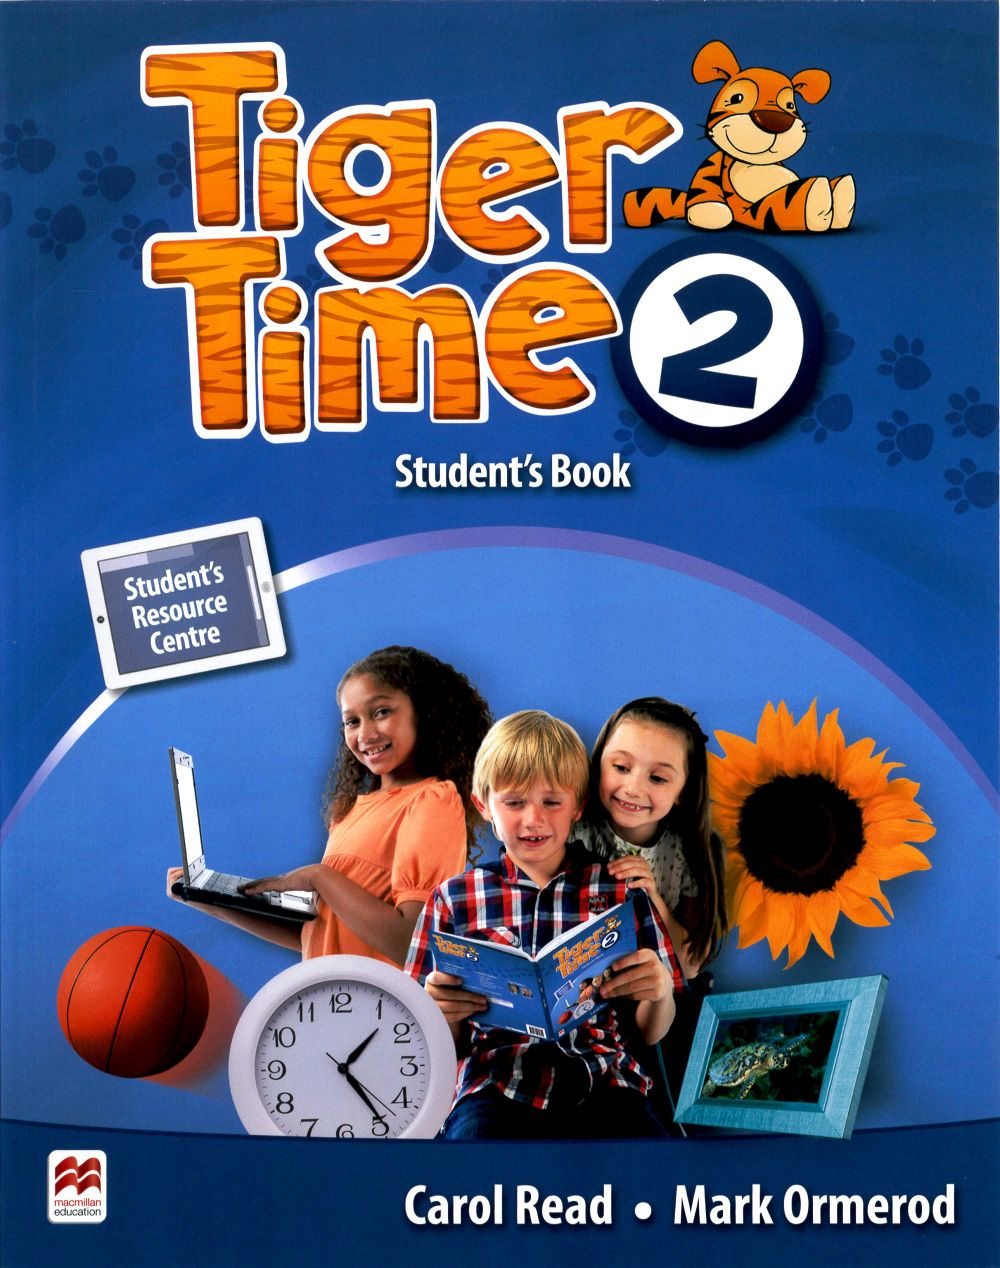 Tiger Time (2) Student’s Book with Access Code(1/e)